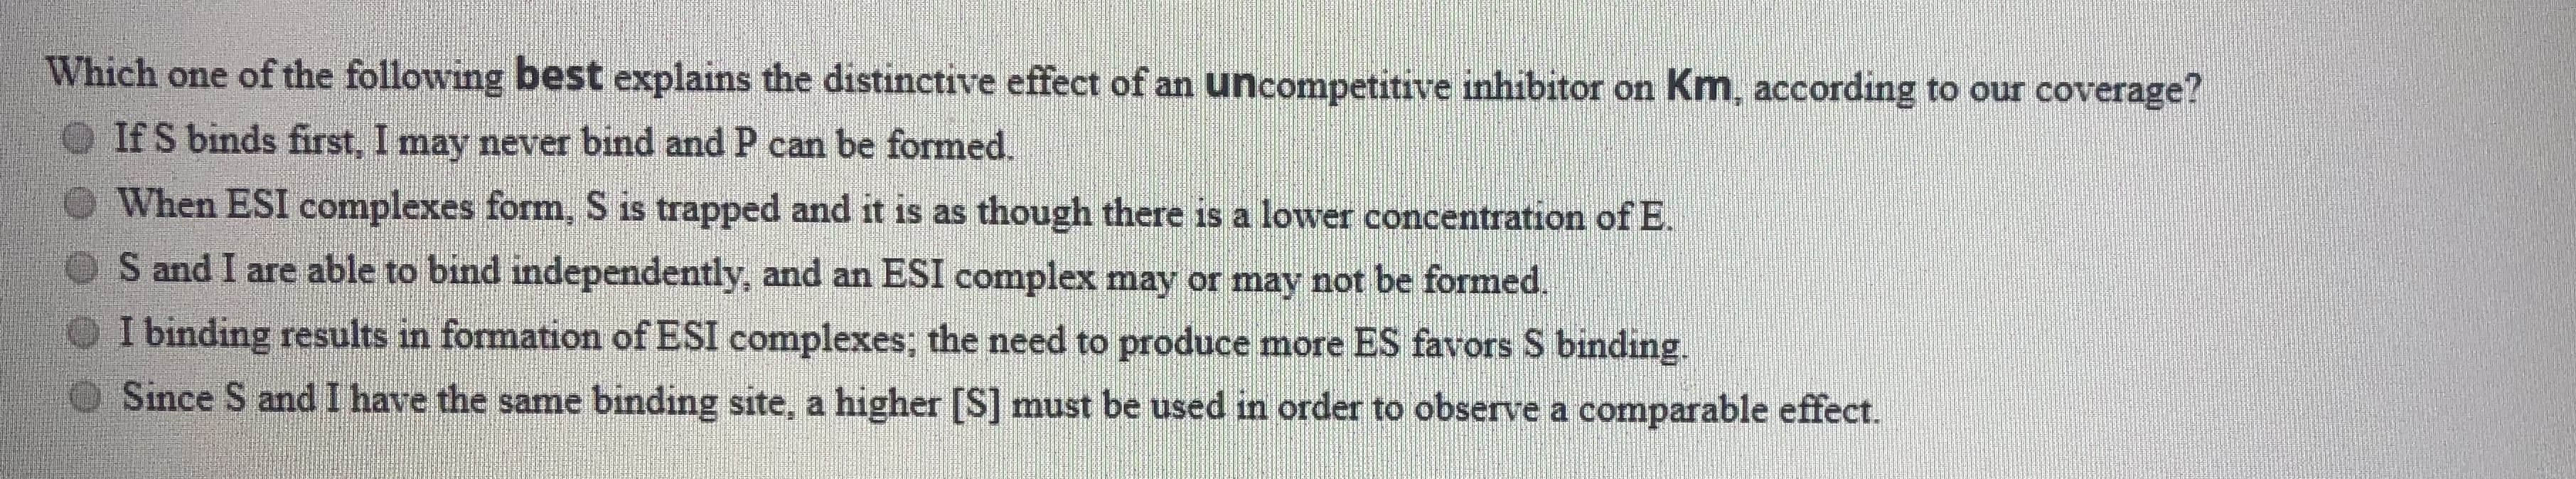 Which one of the following best explains the distinctive effect of an uncompetitive inhibitor on Km, according to our coverage?
If S binds first, I may never bind and P can be formed.
When ESI complexes form, S is trapped and it is as though there is a lower concentration of E.
